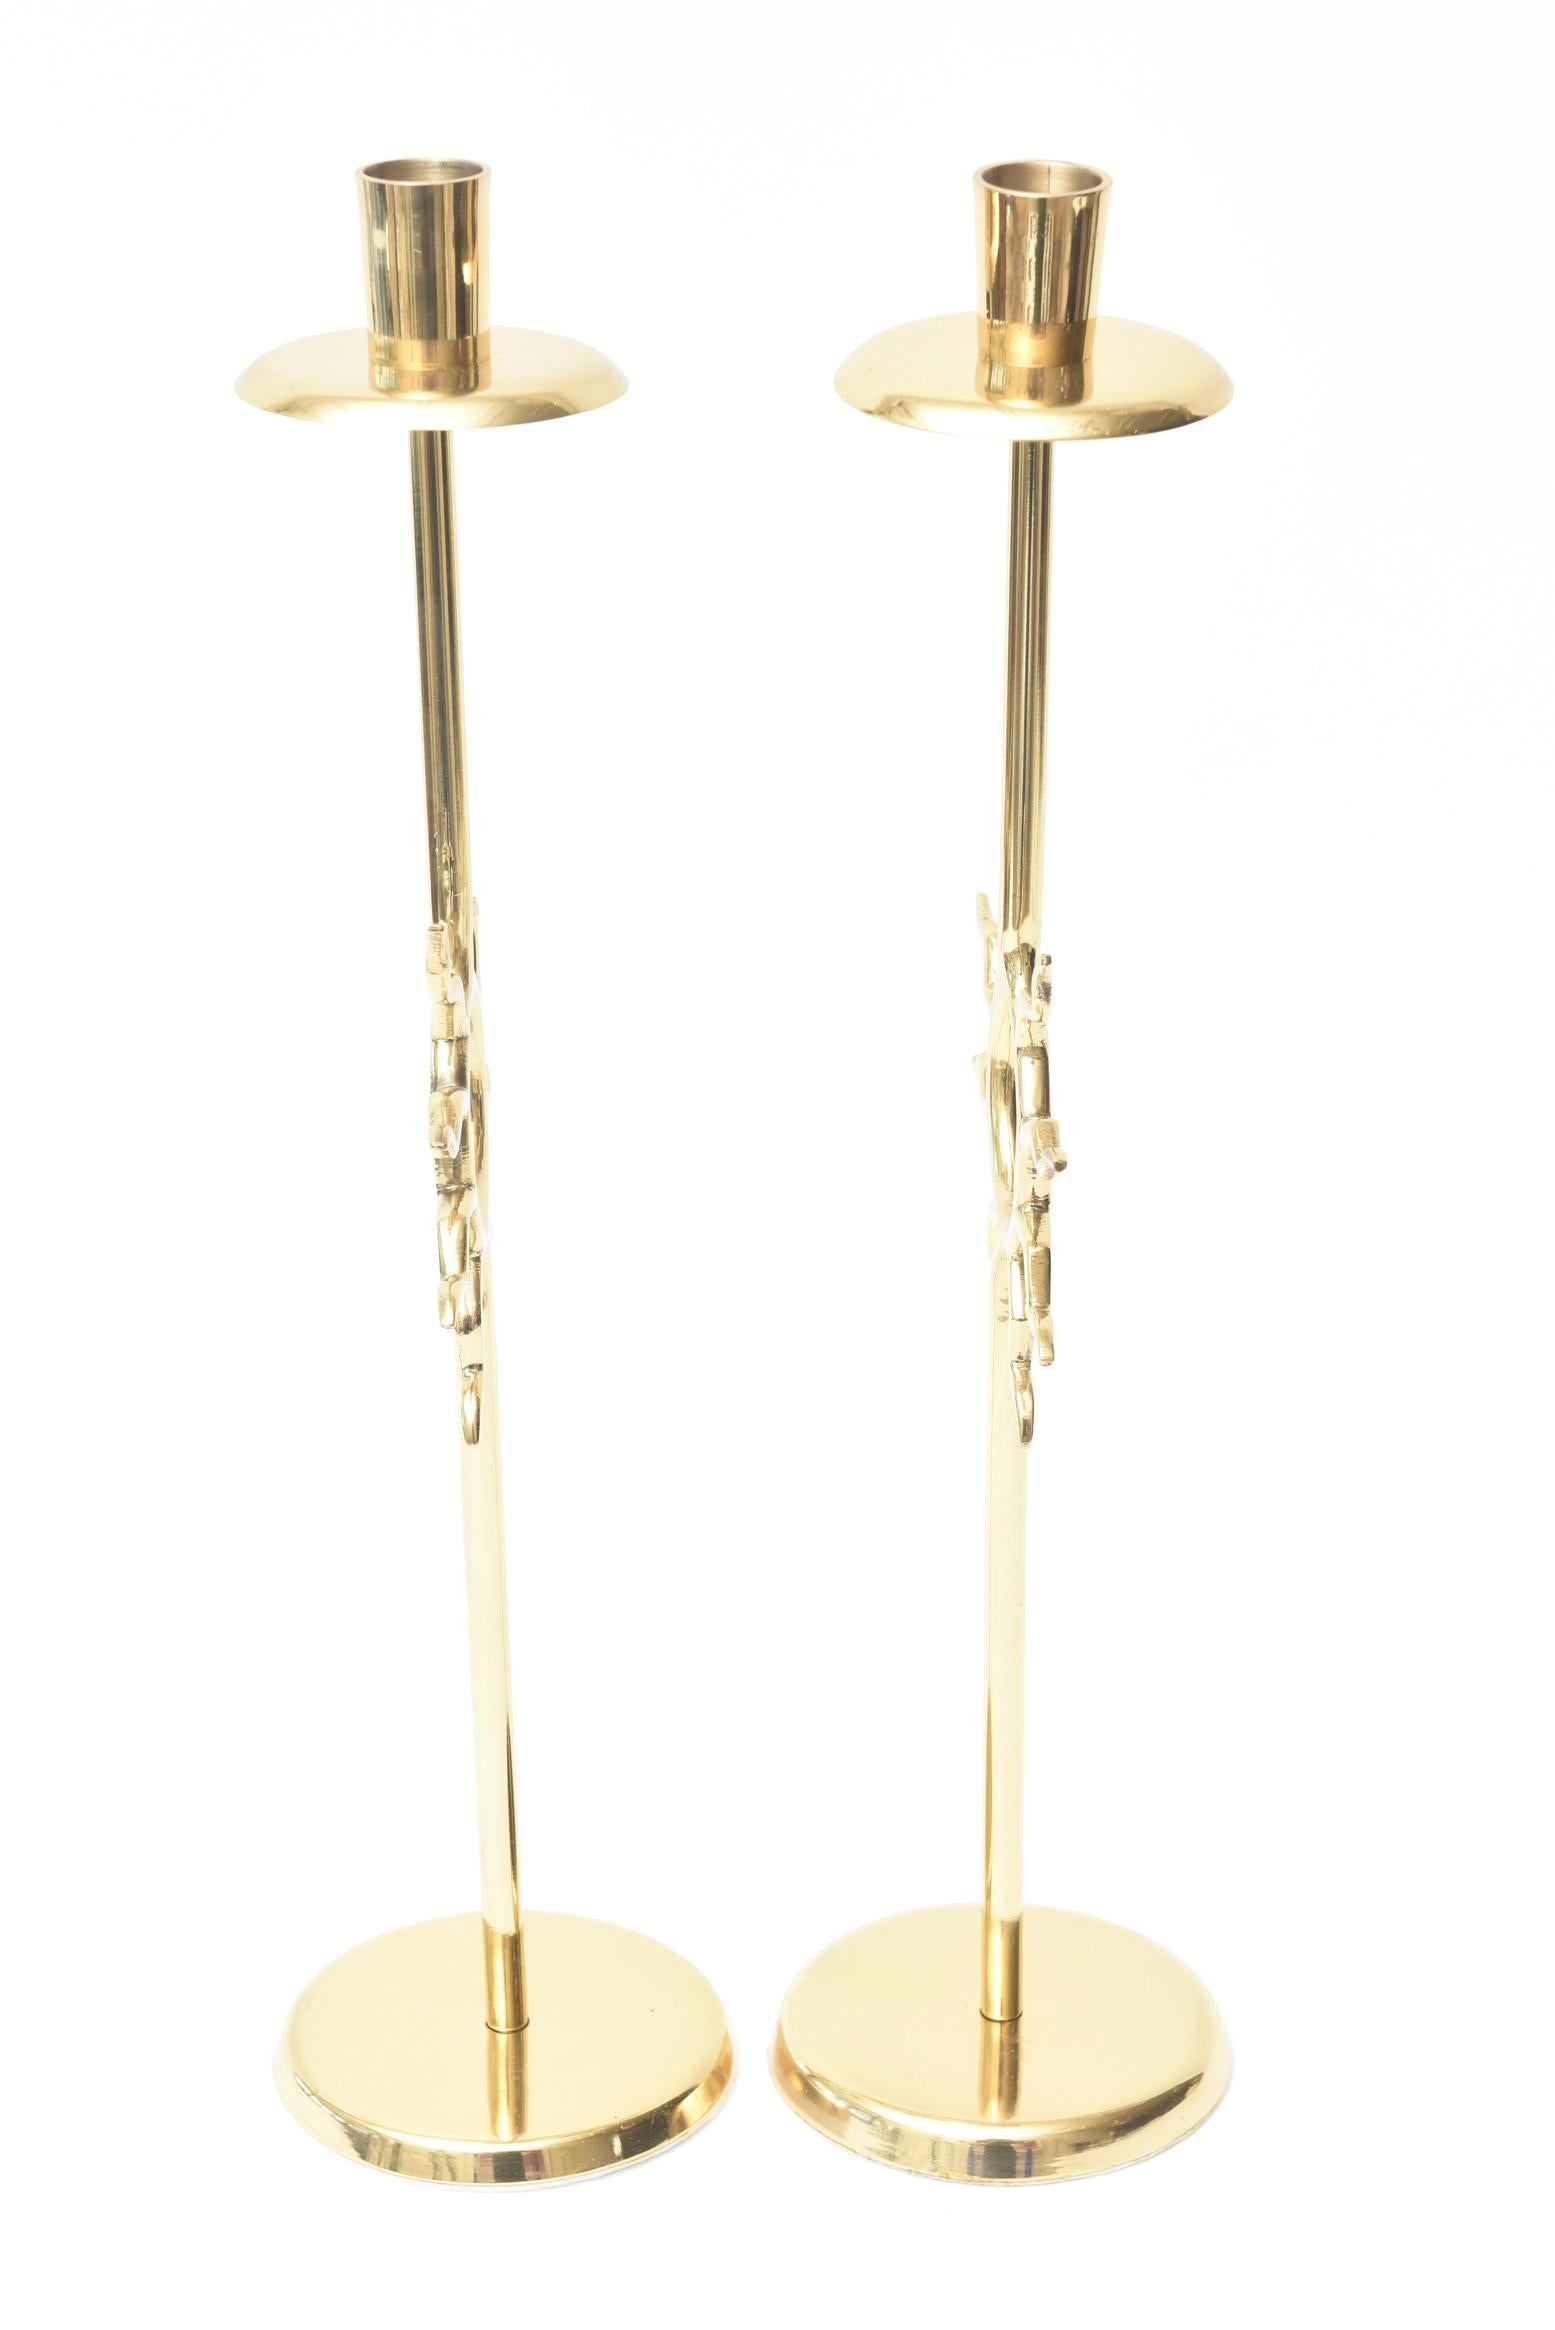 Brass Candlesticks Fornasetti Style with Sun Motif  Vintage Pair Of For Sale 2